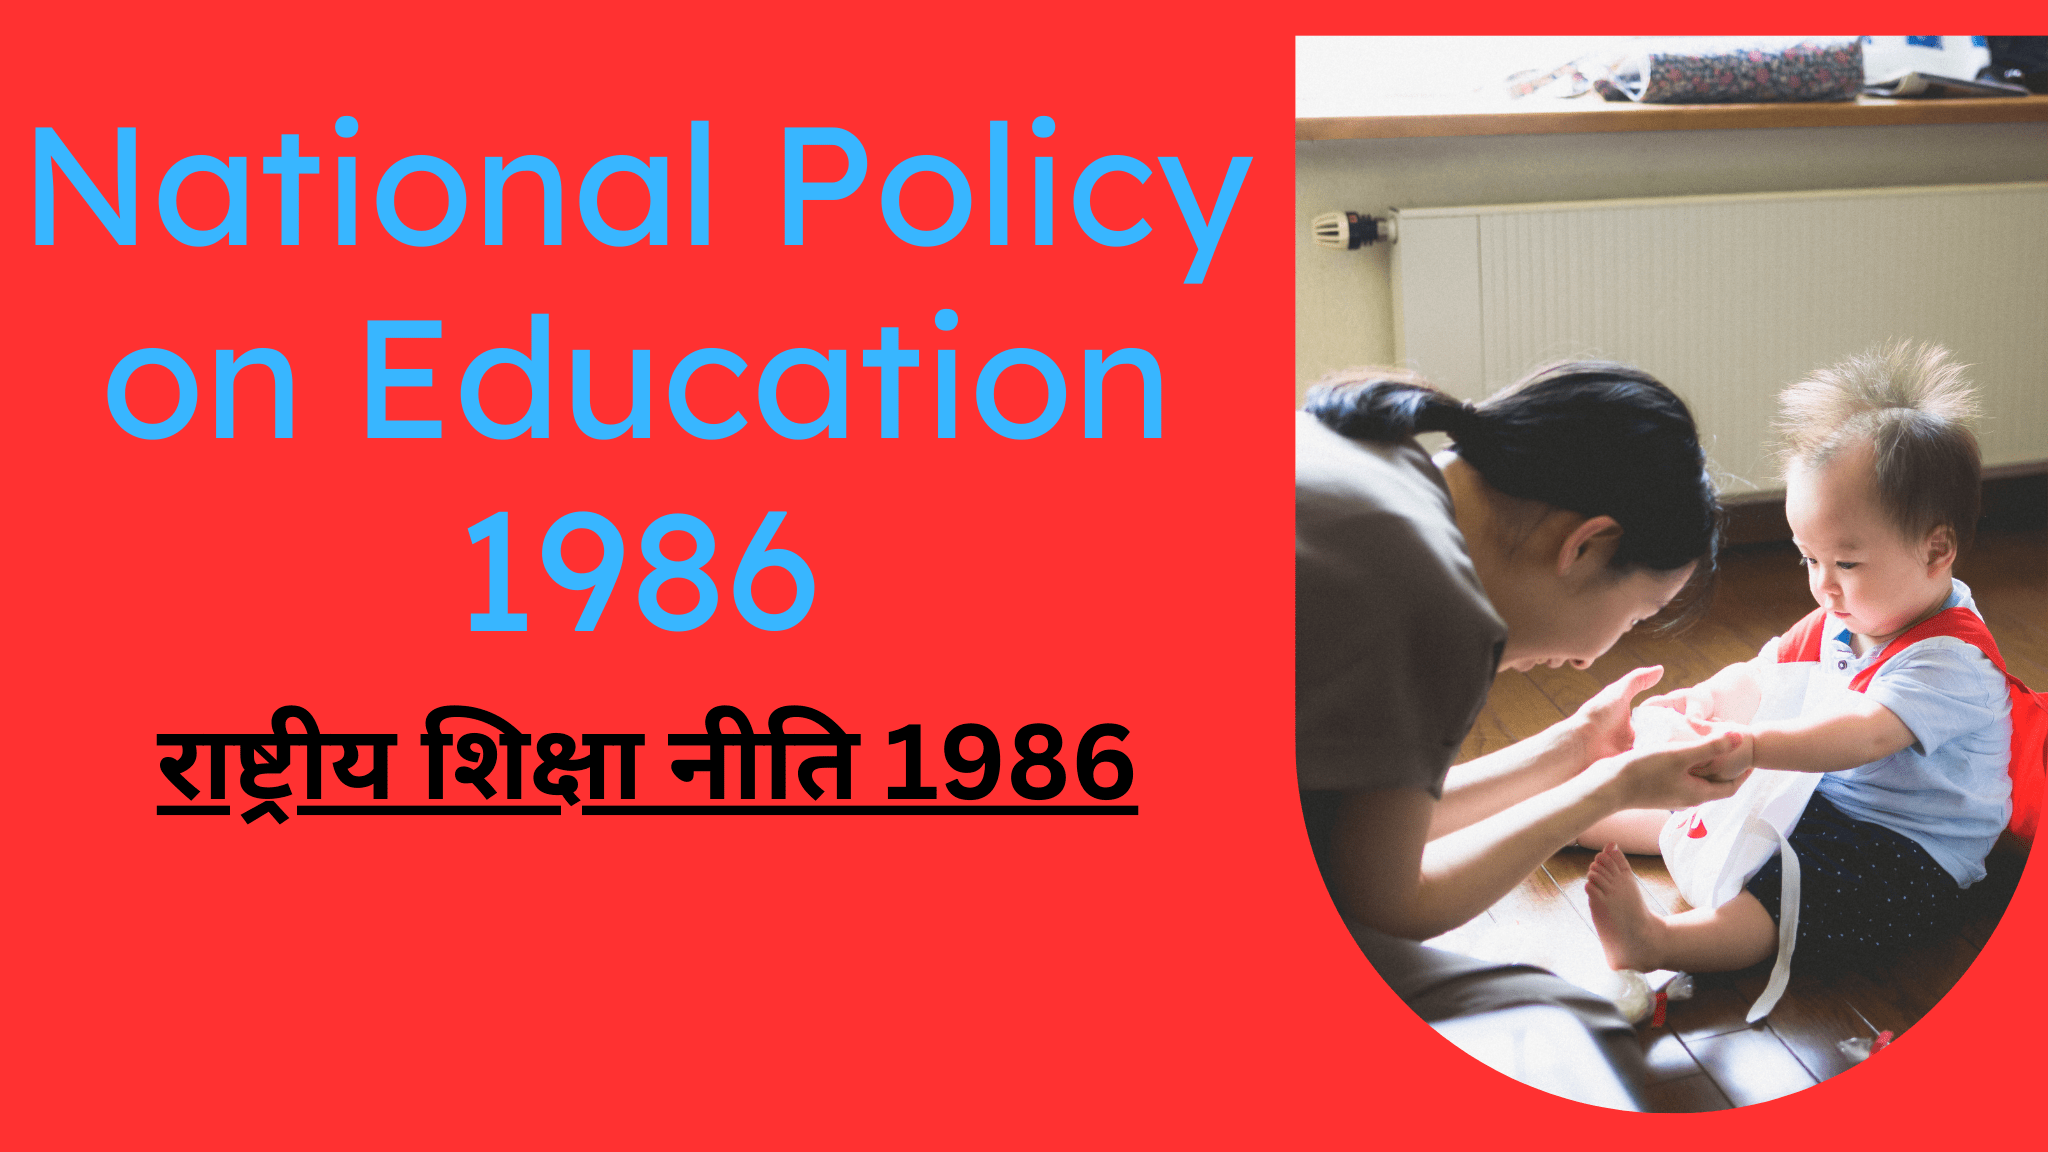 National Policy on Education 1986